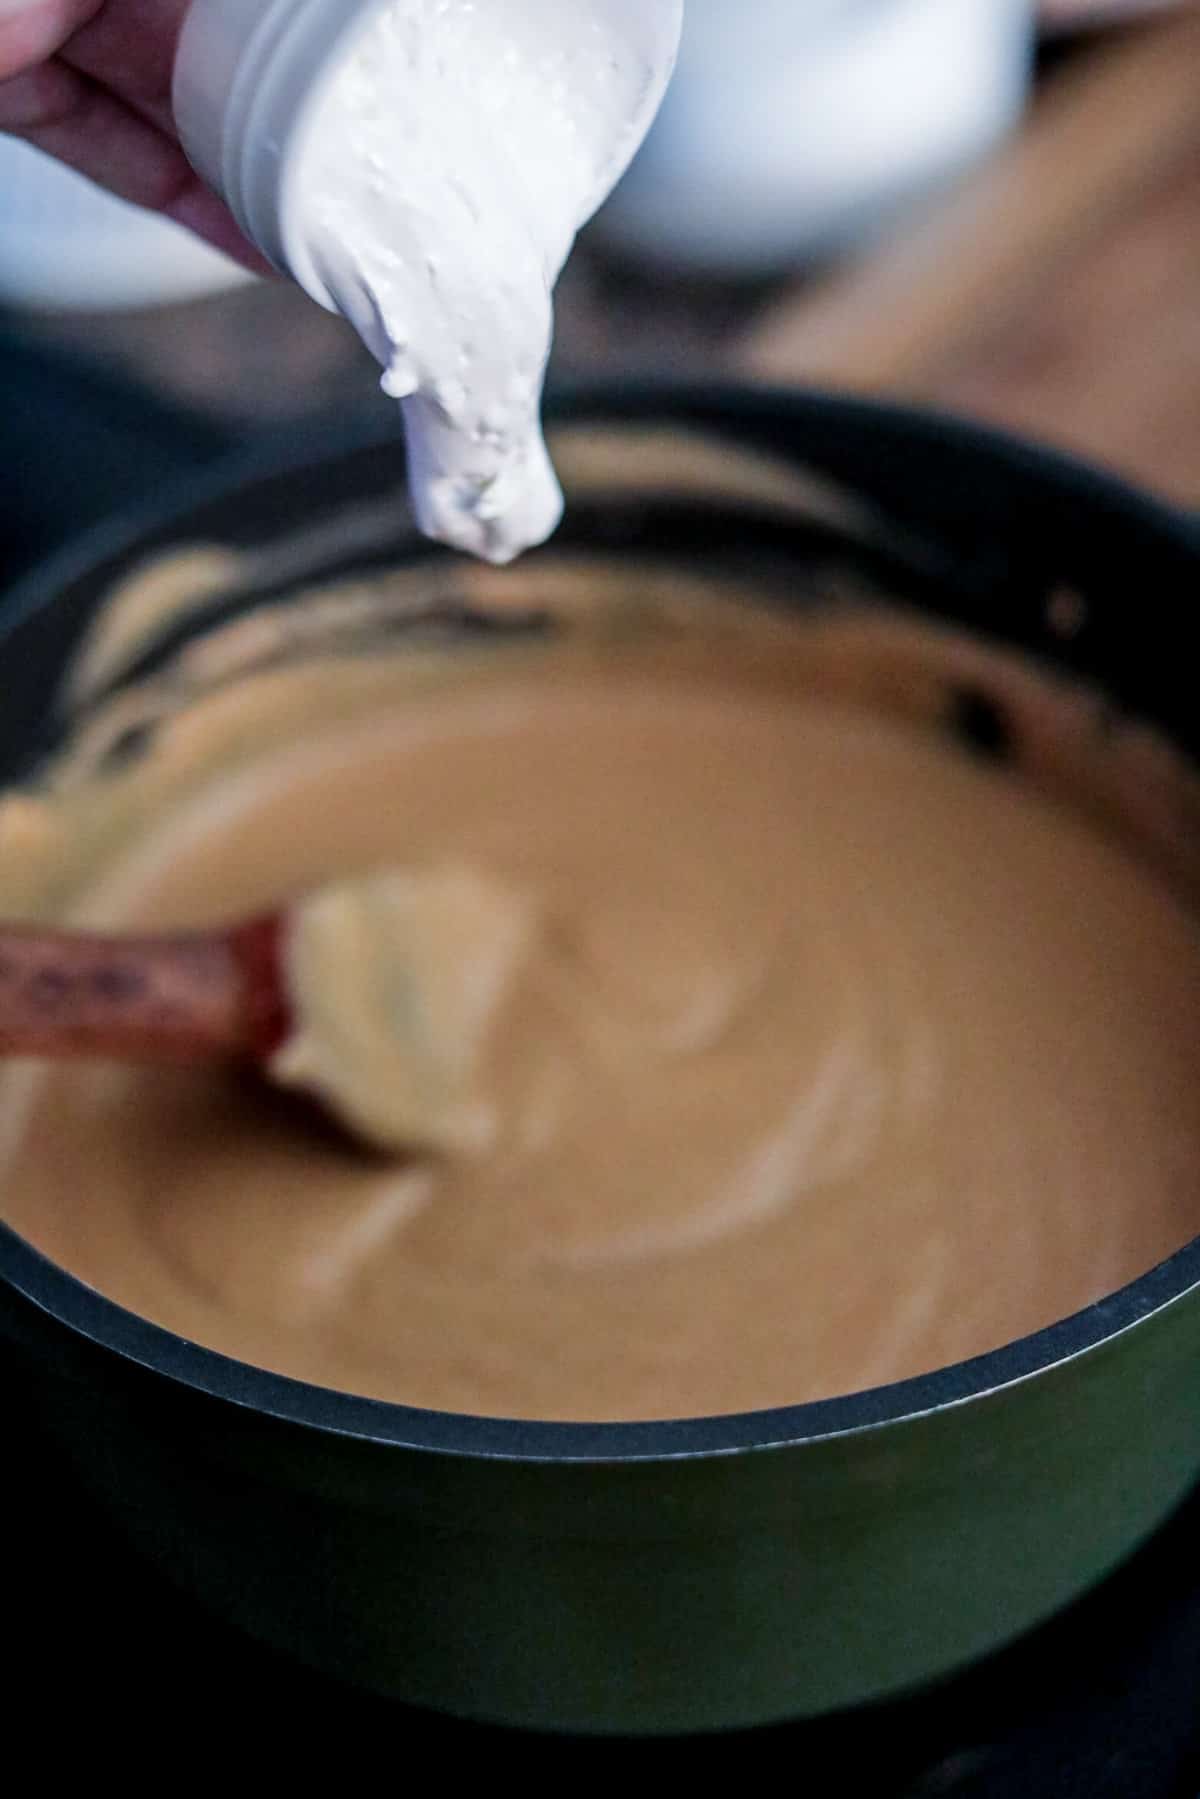 marshmallow fluff added to cooking fudge.